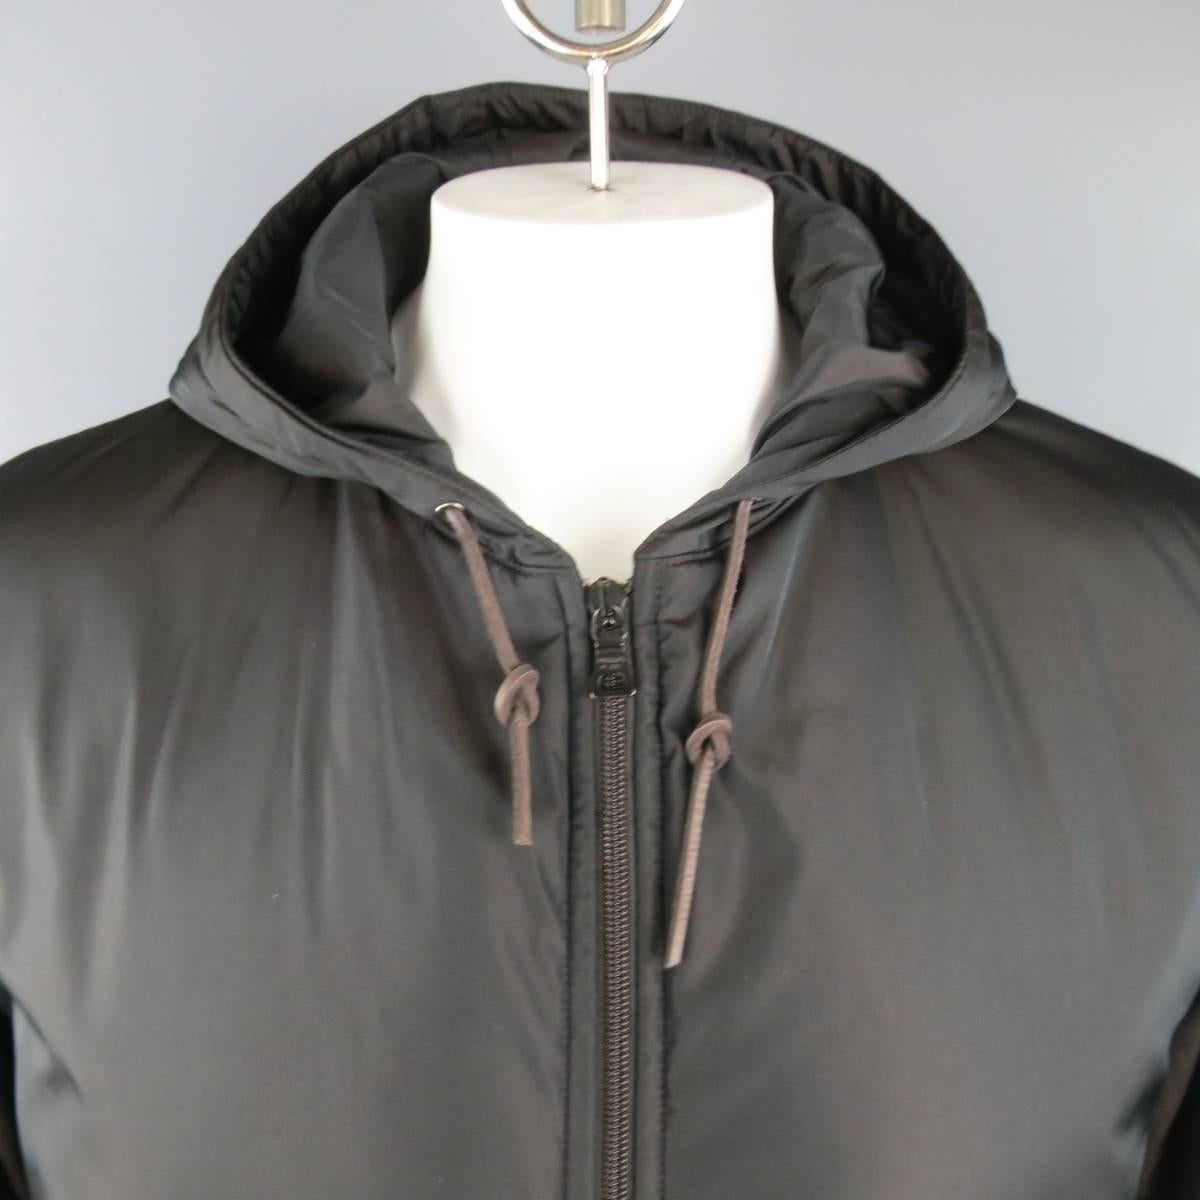 Classic PRADA jacket in a iridescent brown sport fabric featuring a zip up front, slanted zip pockets, drawstring hood with leather pulls, charcoal knit cuffs, under arm slits, and leather elbow patches. Made in Italy.
 
Excellent Pre-Owned